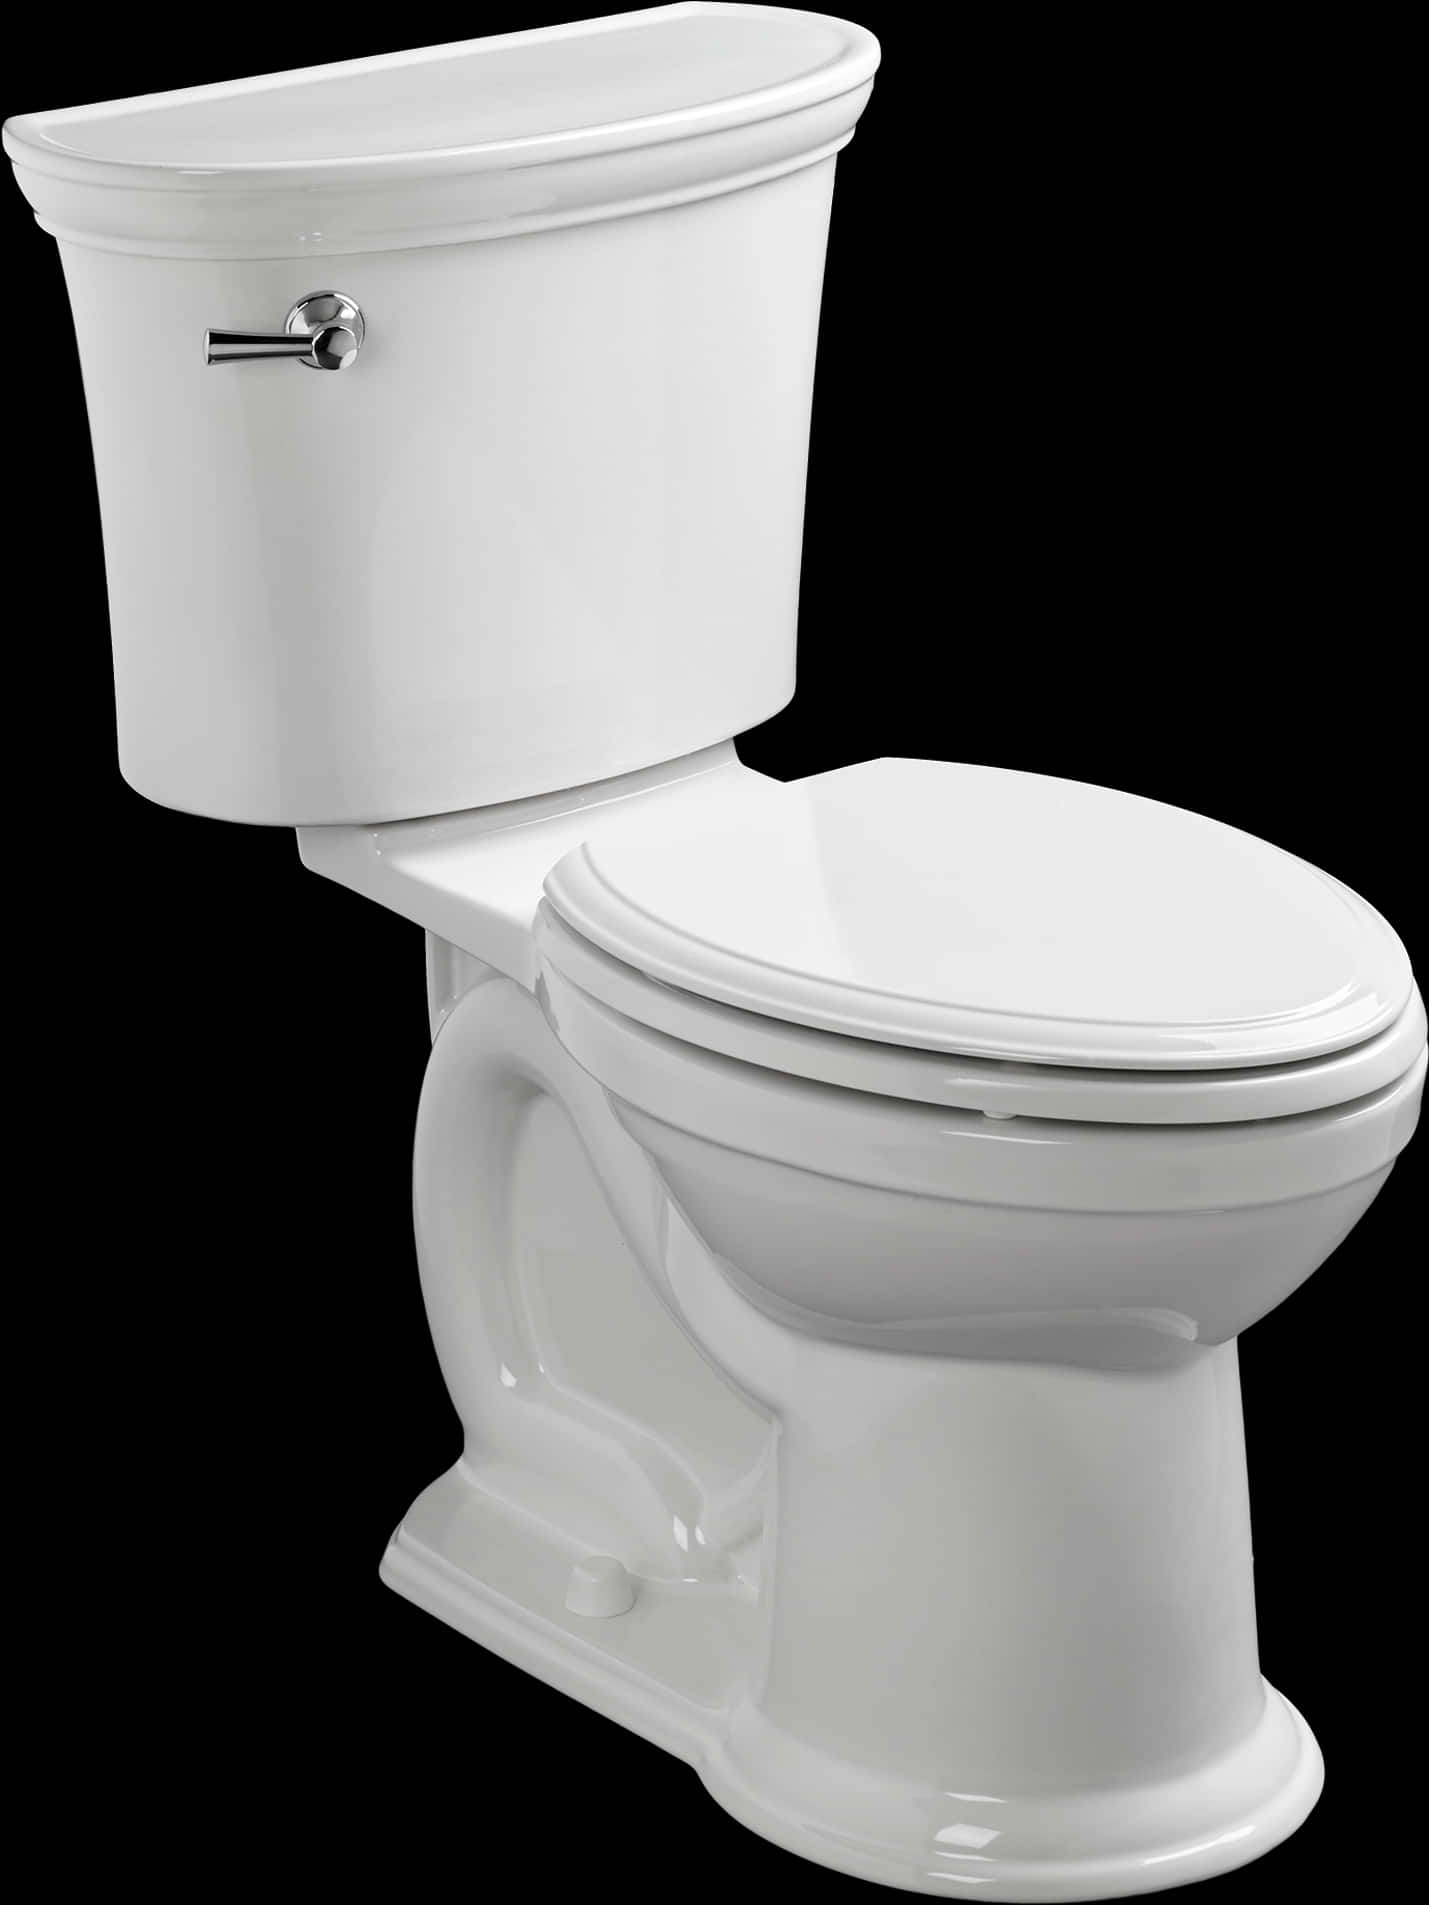 A White Toilet With A Black Background